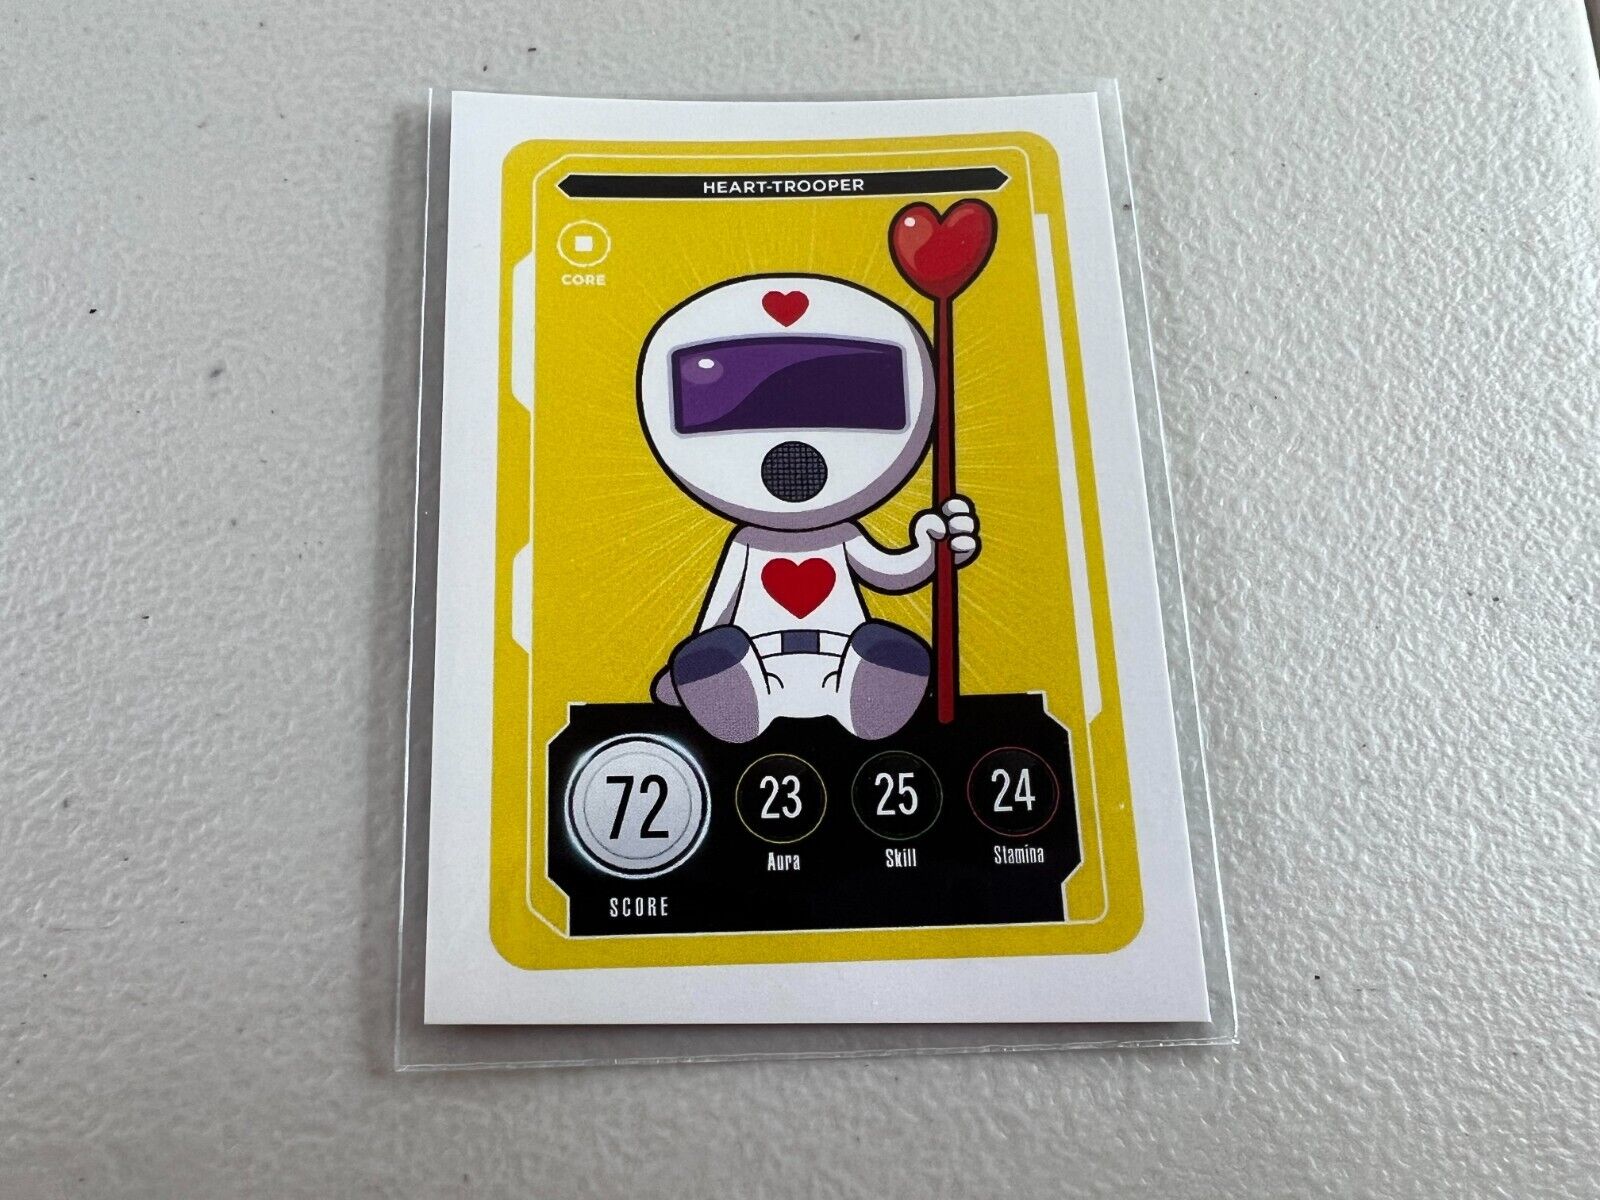 Heart-Trooper VeeFriends Series 2 Compete and Collect Core Card Gary Vee